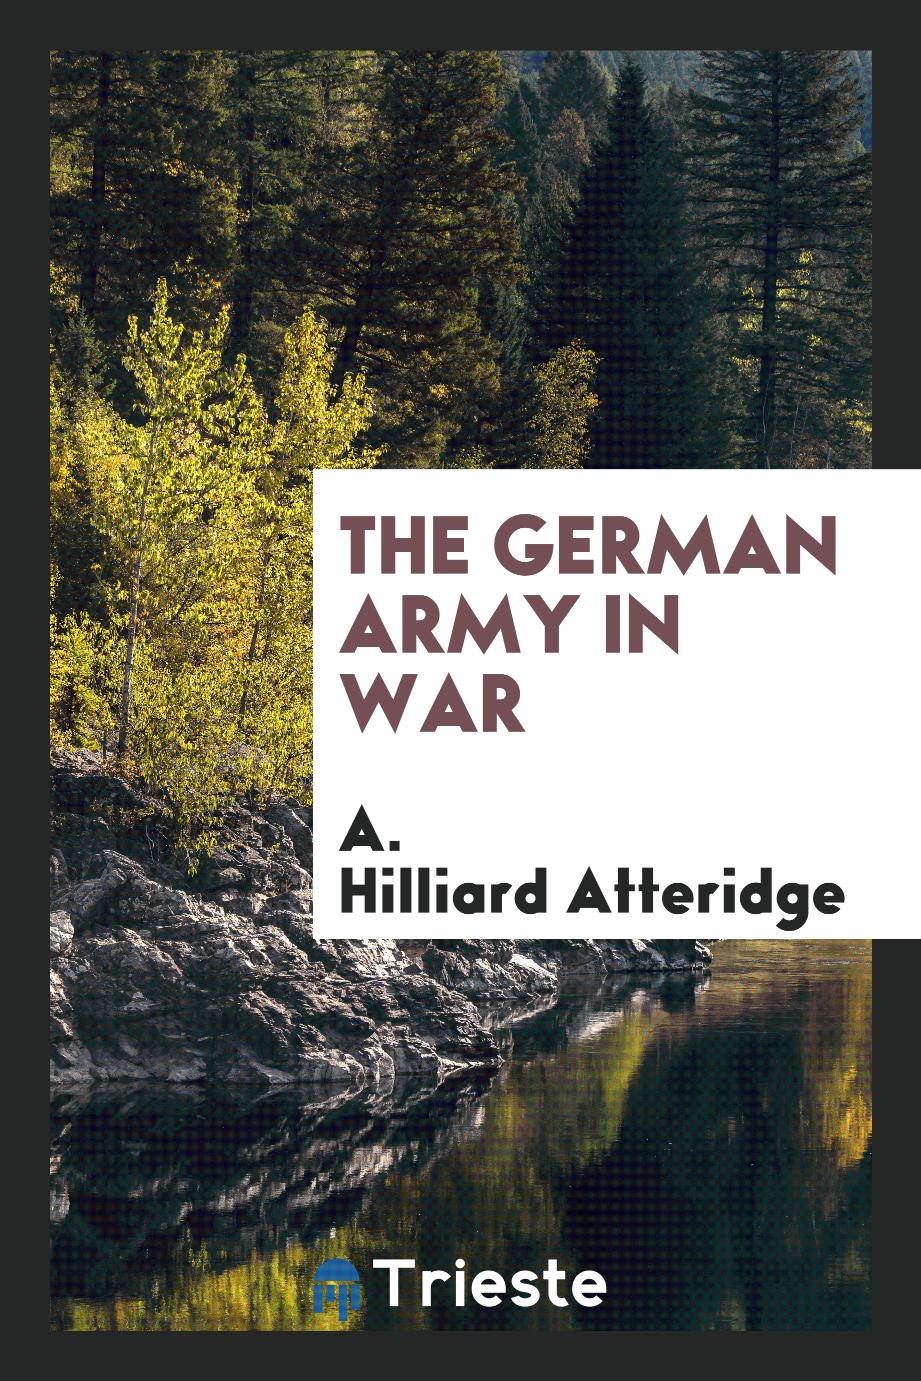 The German Army in War